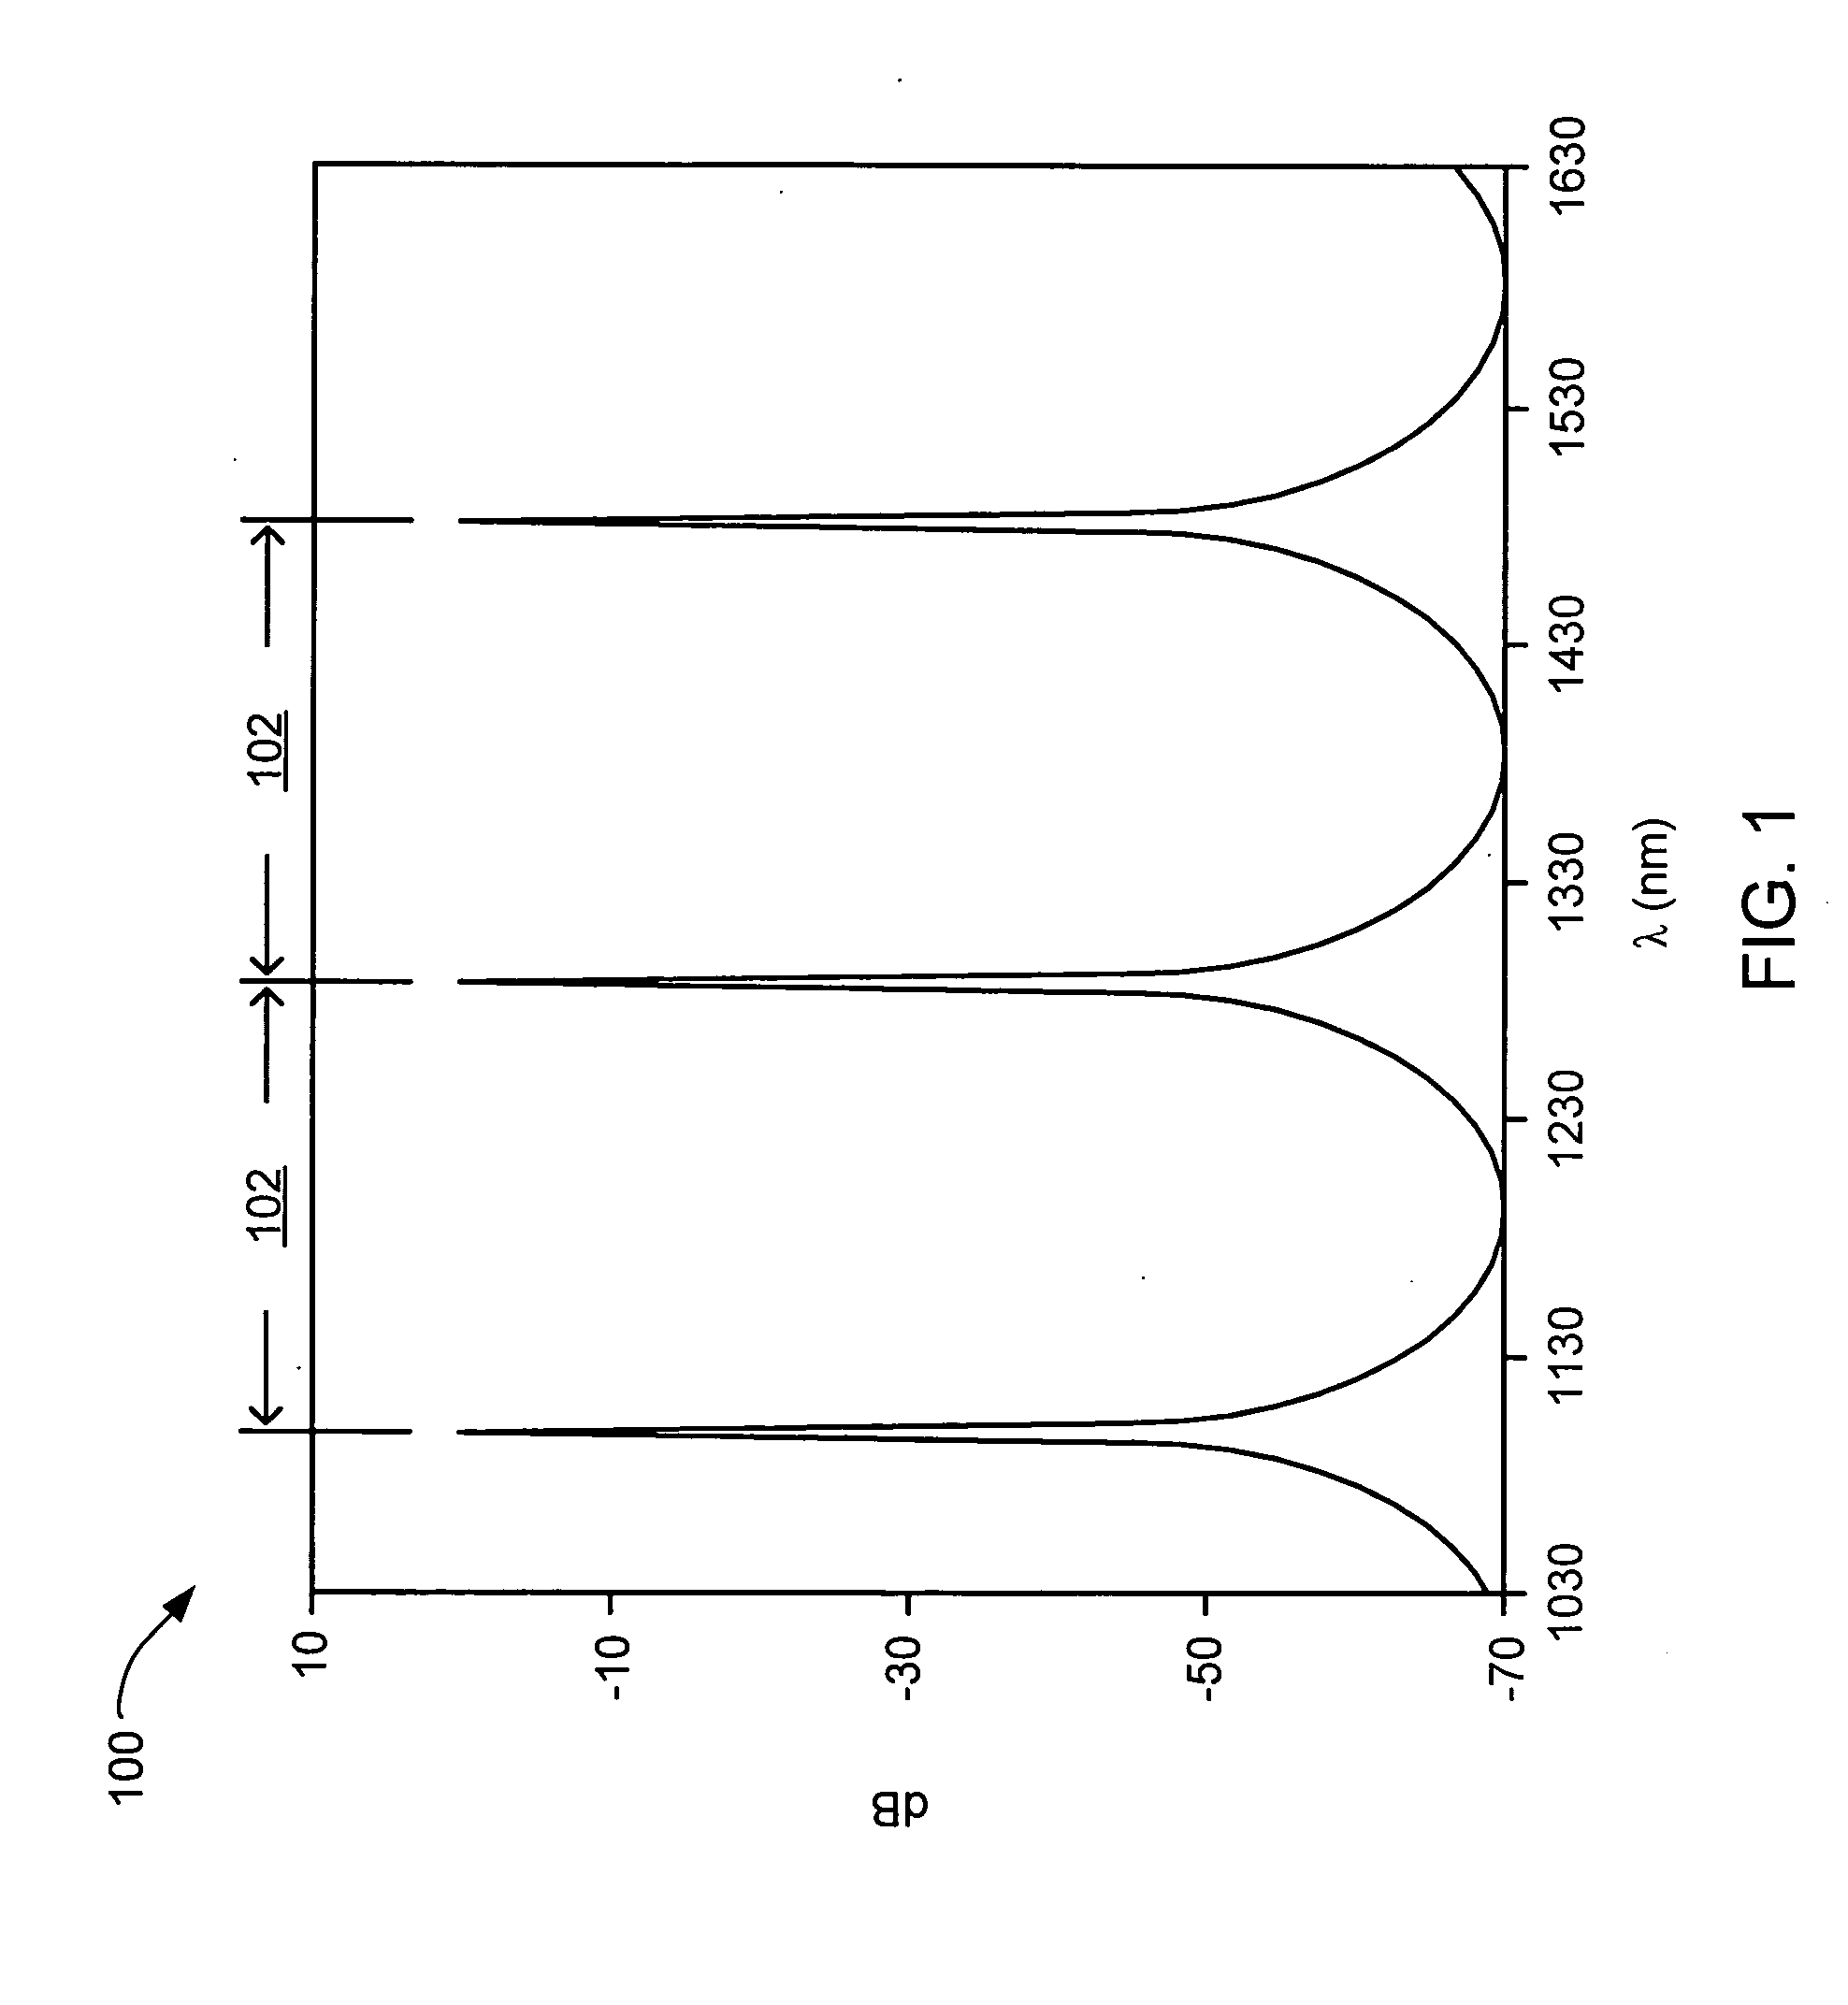 Broad-and inter-band multi-wavelength-reference method and apparatus for wavelength measurement or monitoring systems